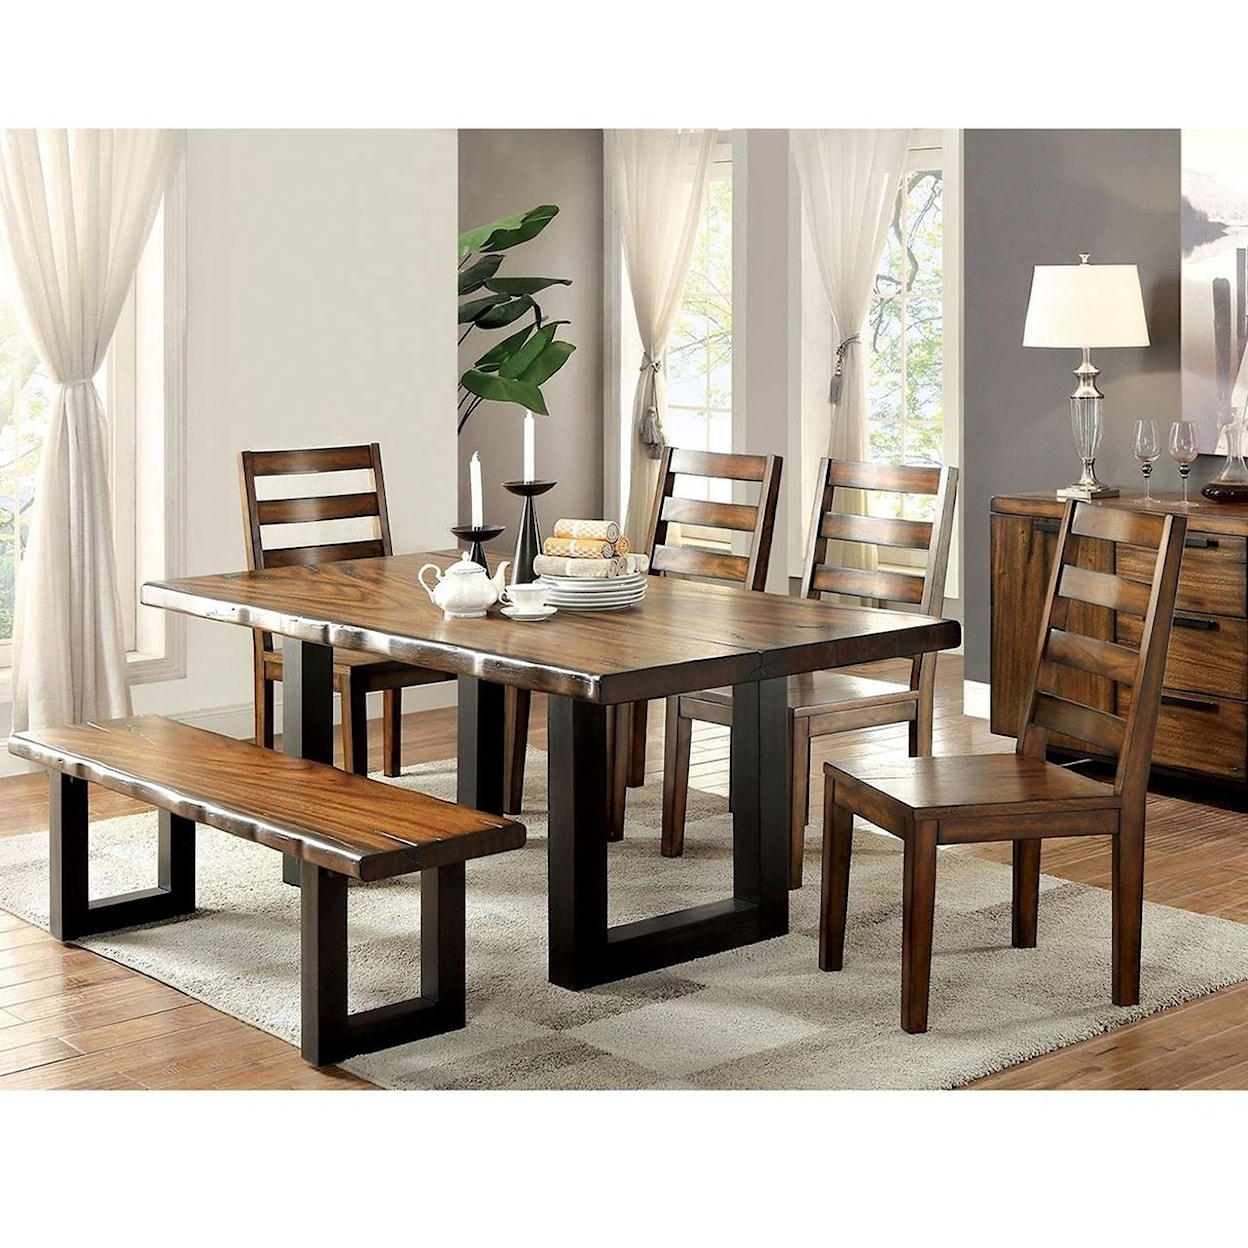 FUSA Maddison Dining Set with Bench